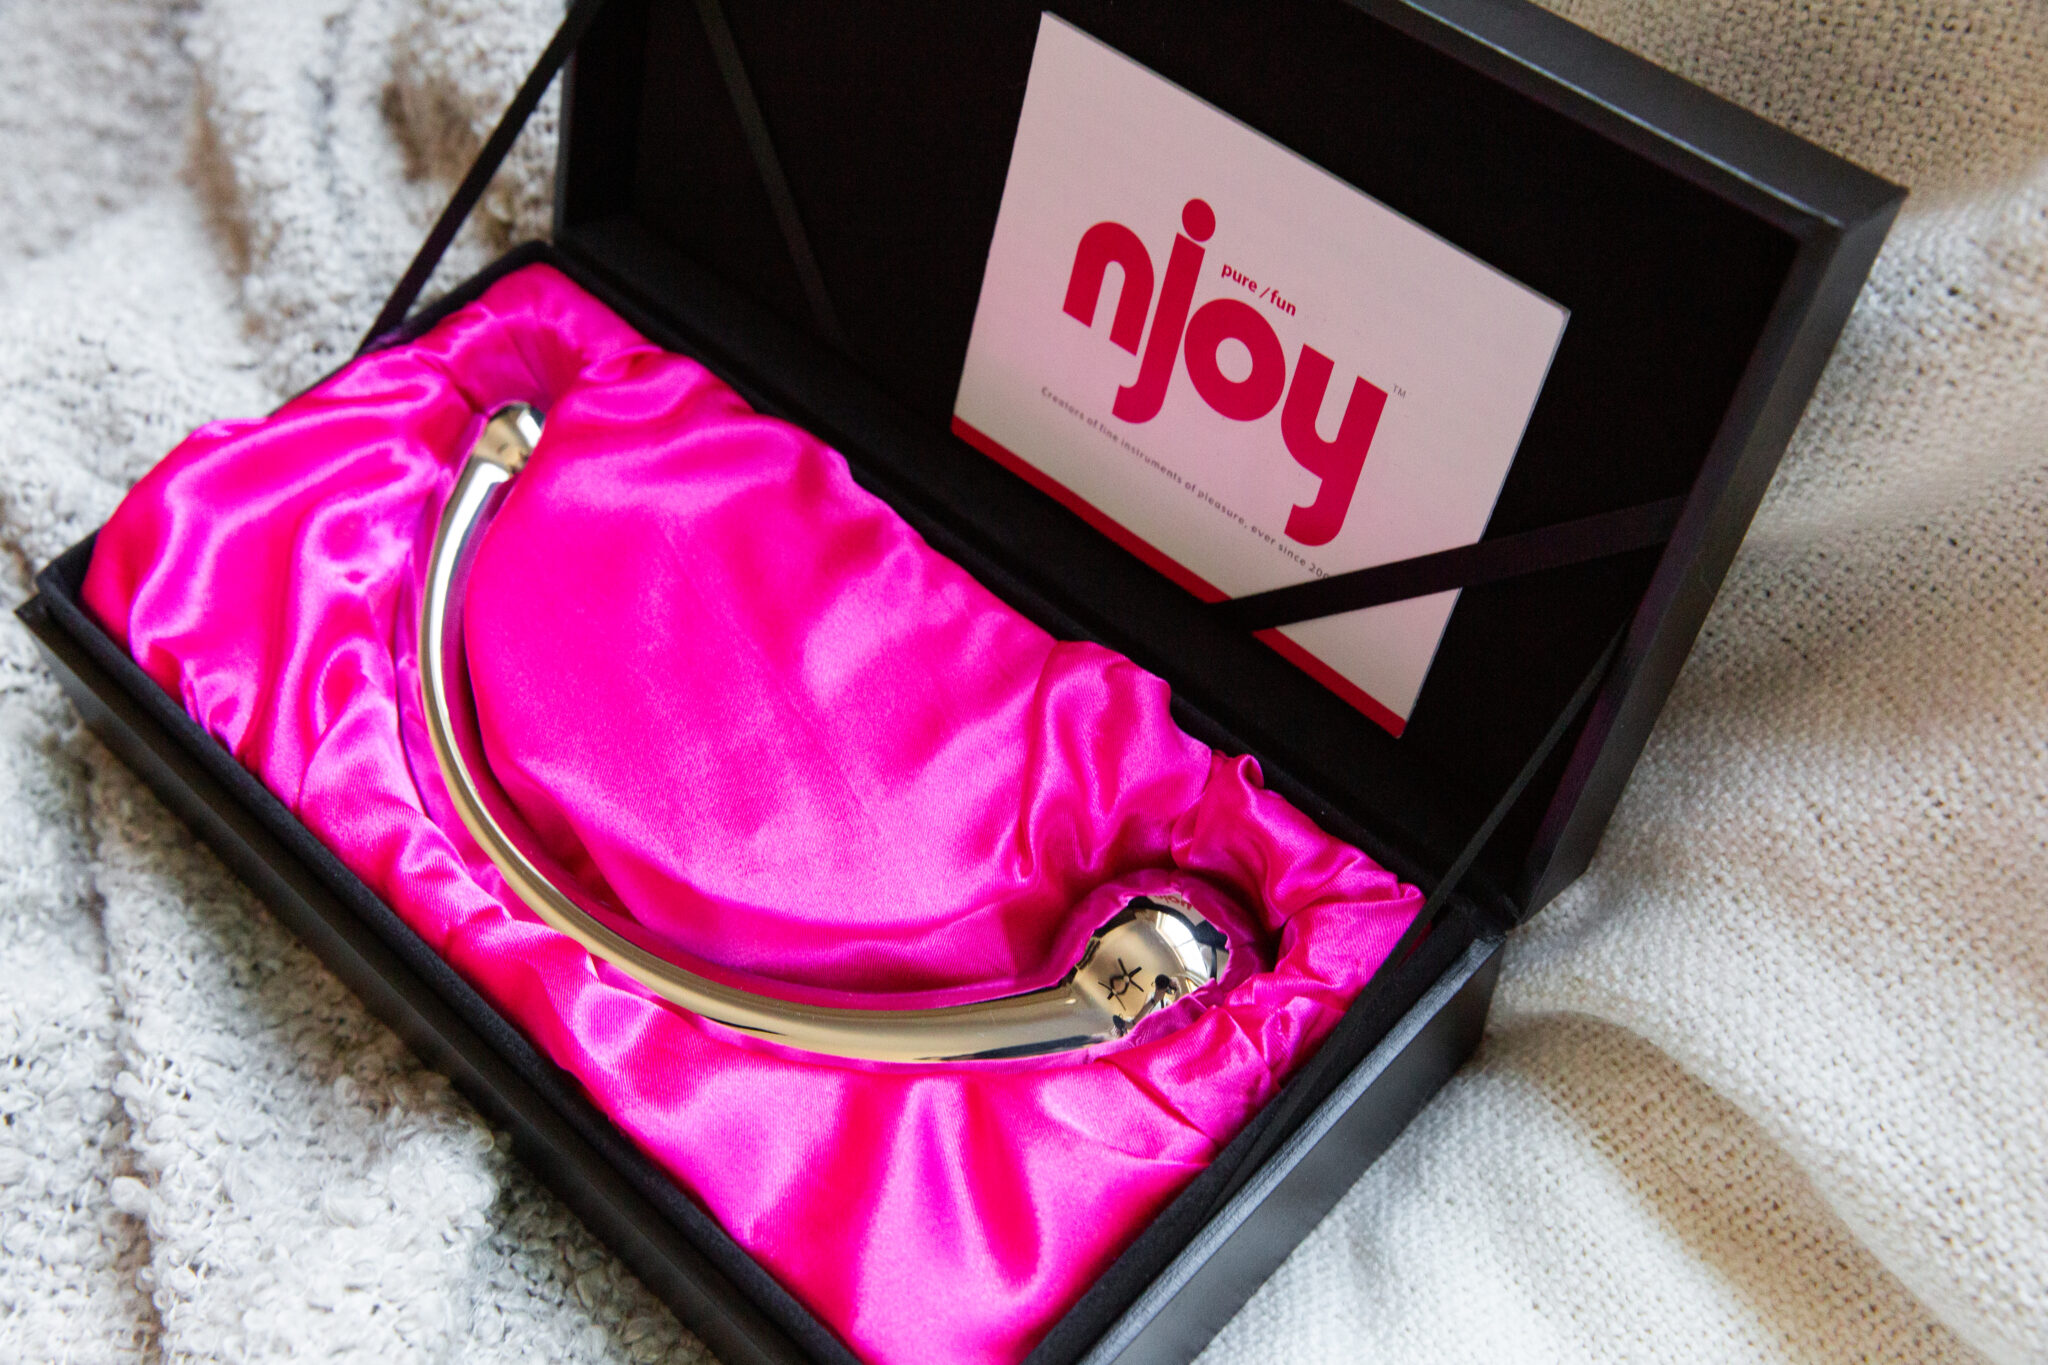 The njoy stainless steel dildo in its sleek, black and pink box.